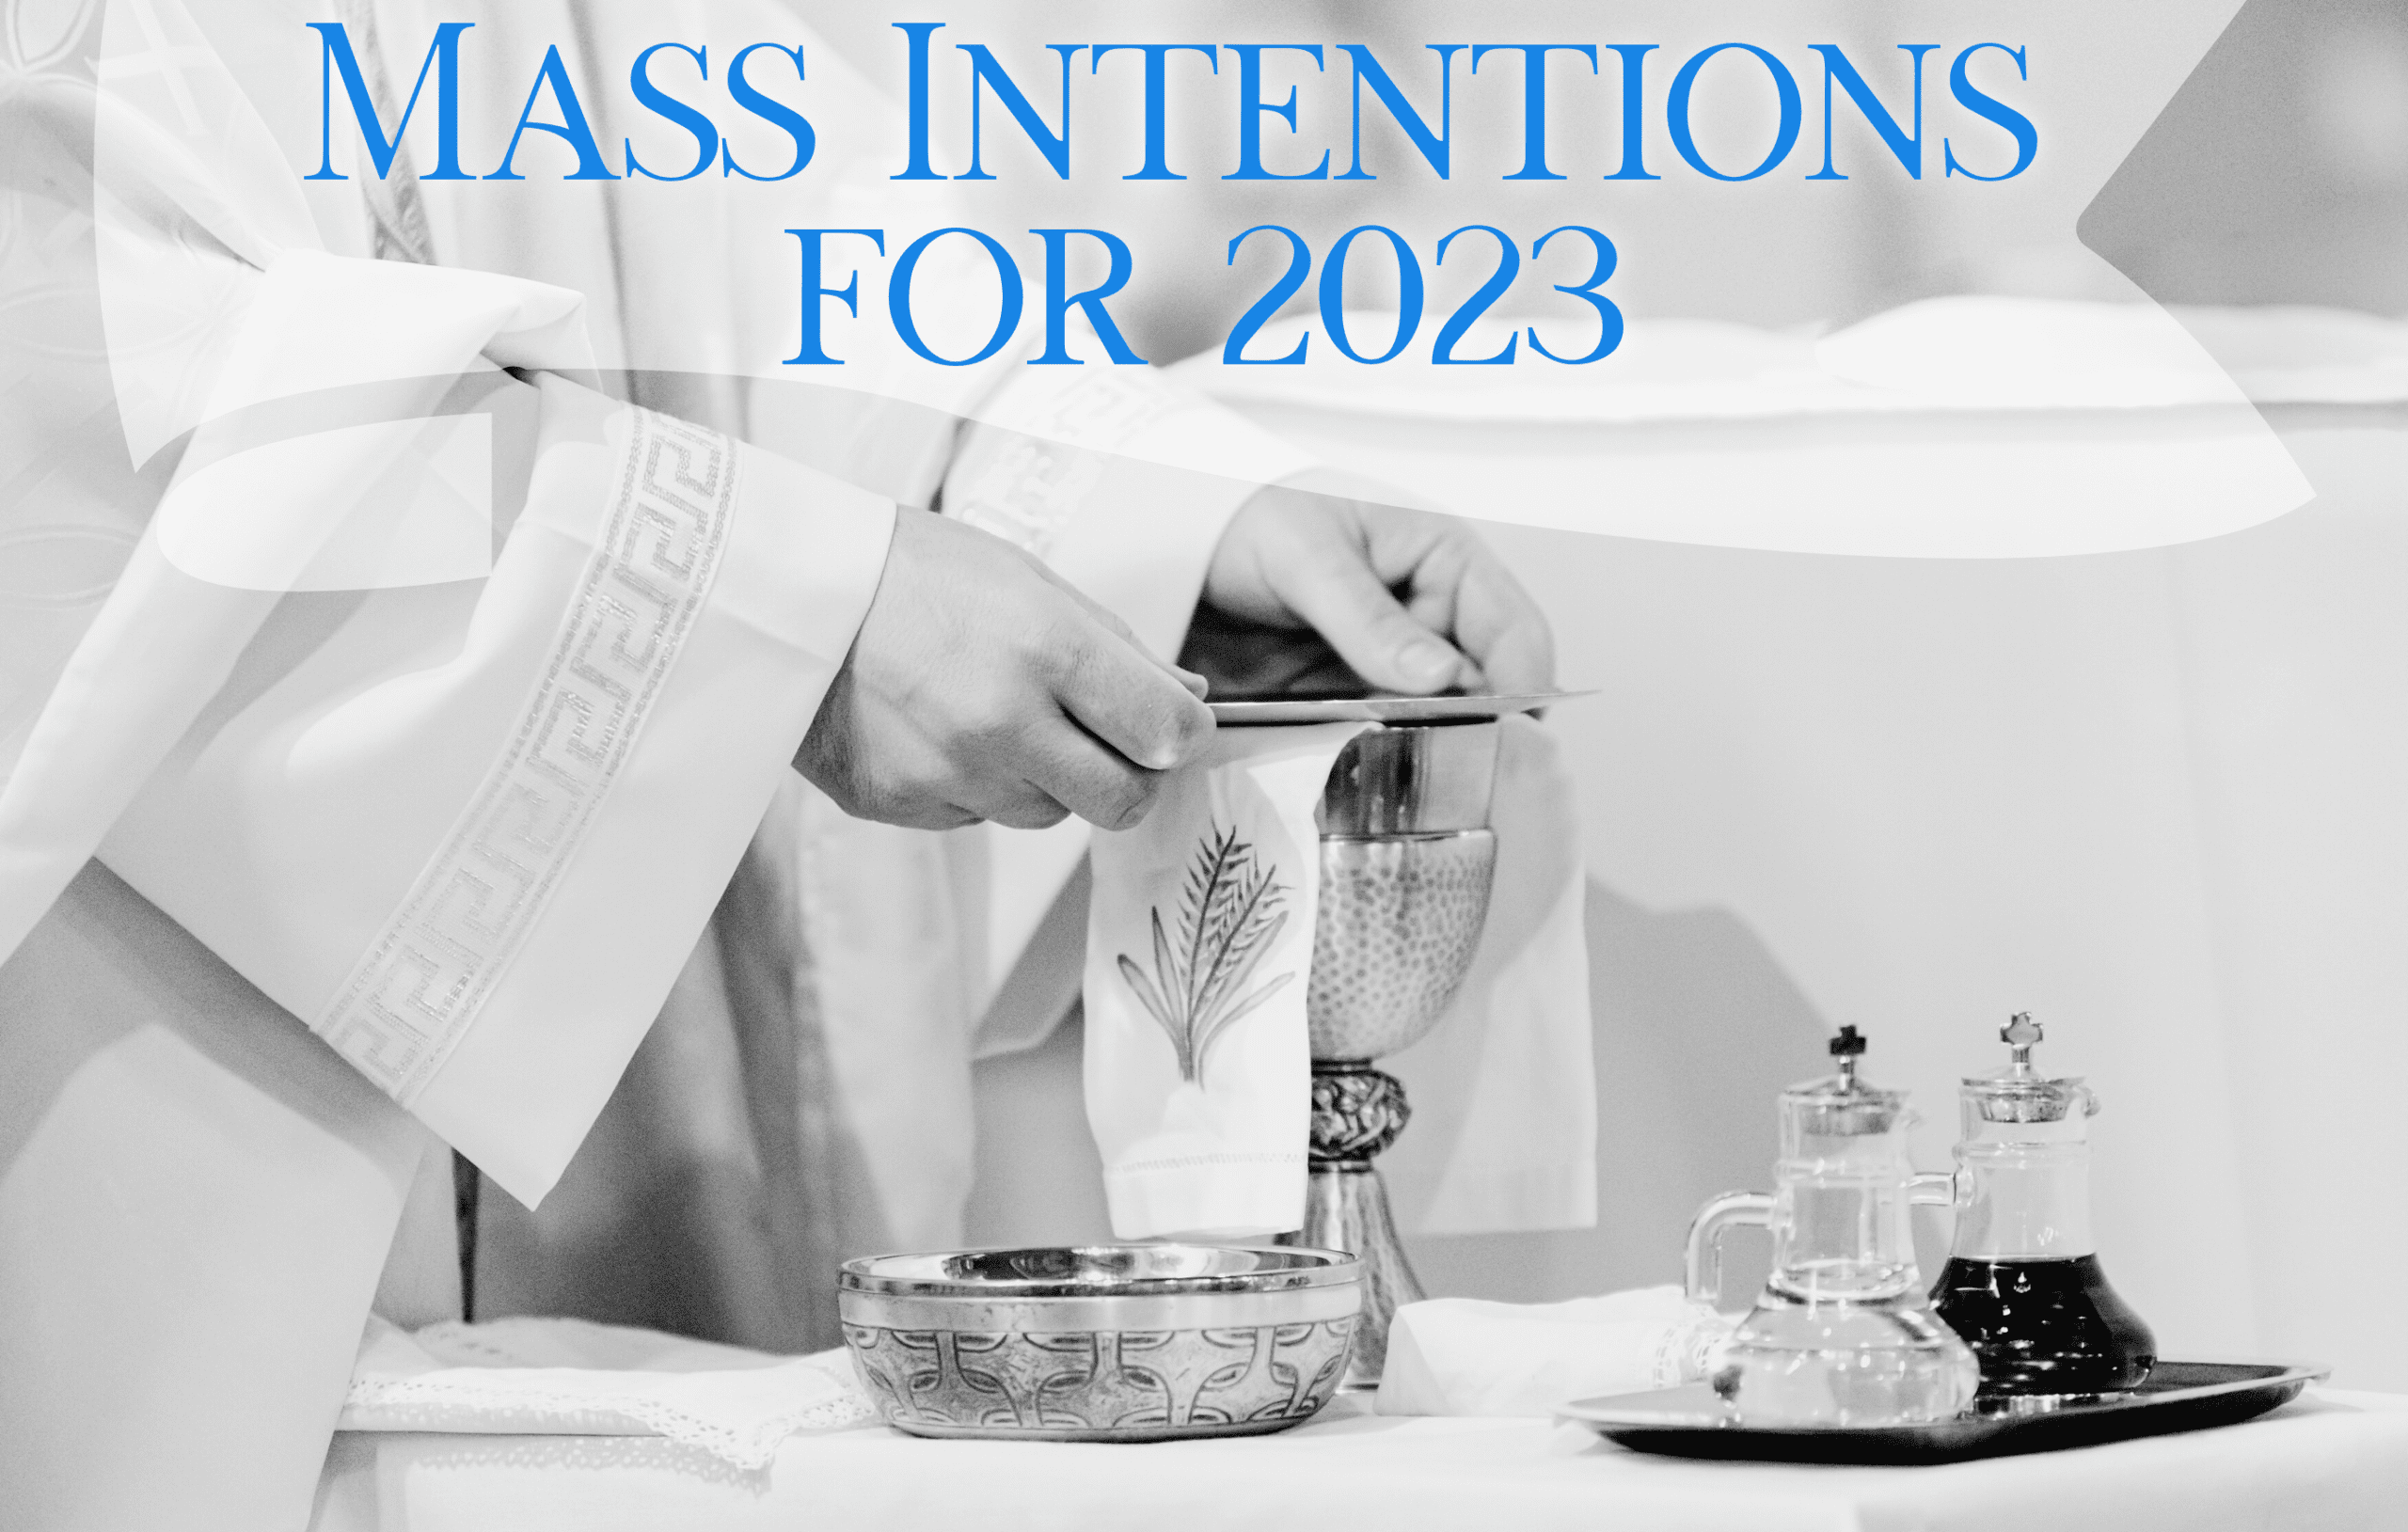 Mass Intentions for 2023